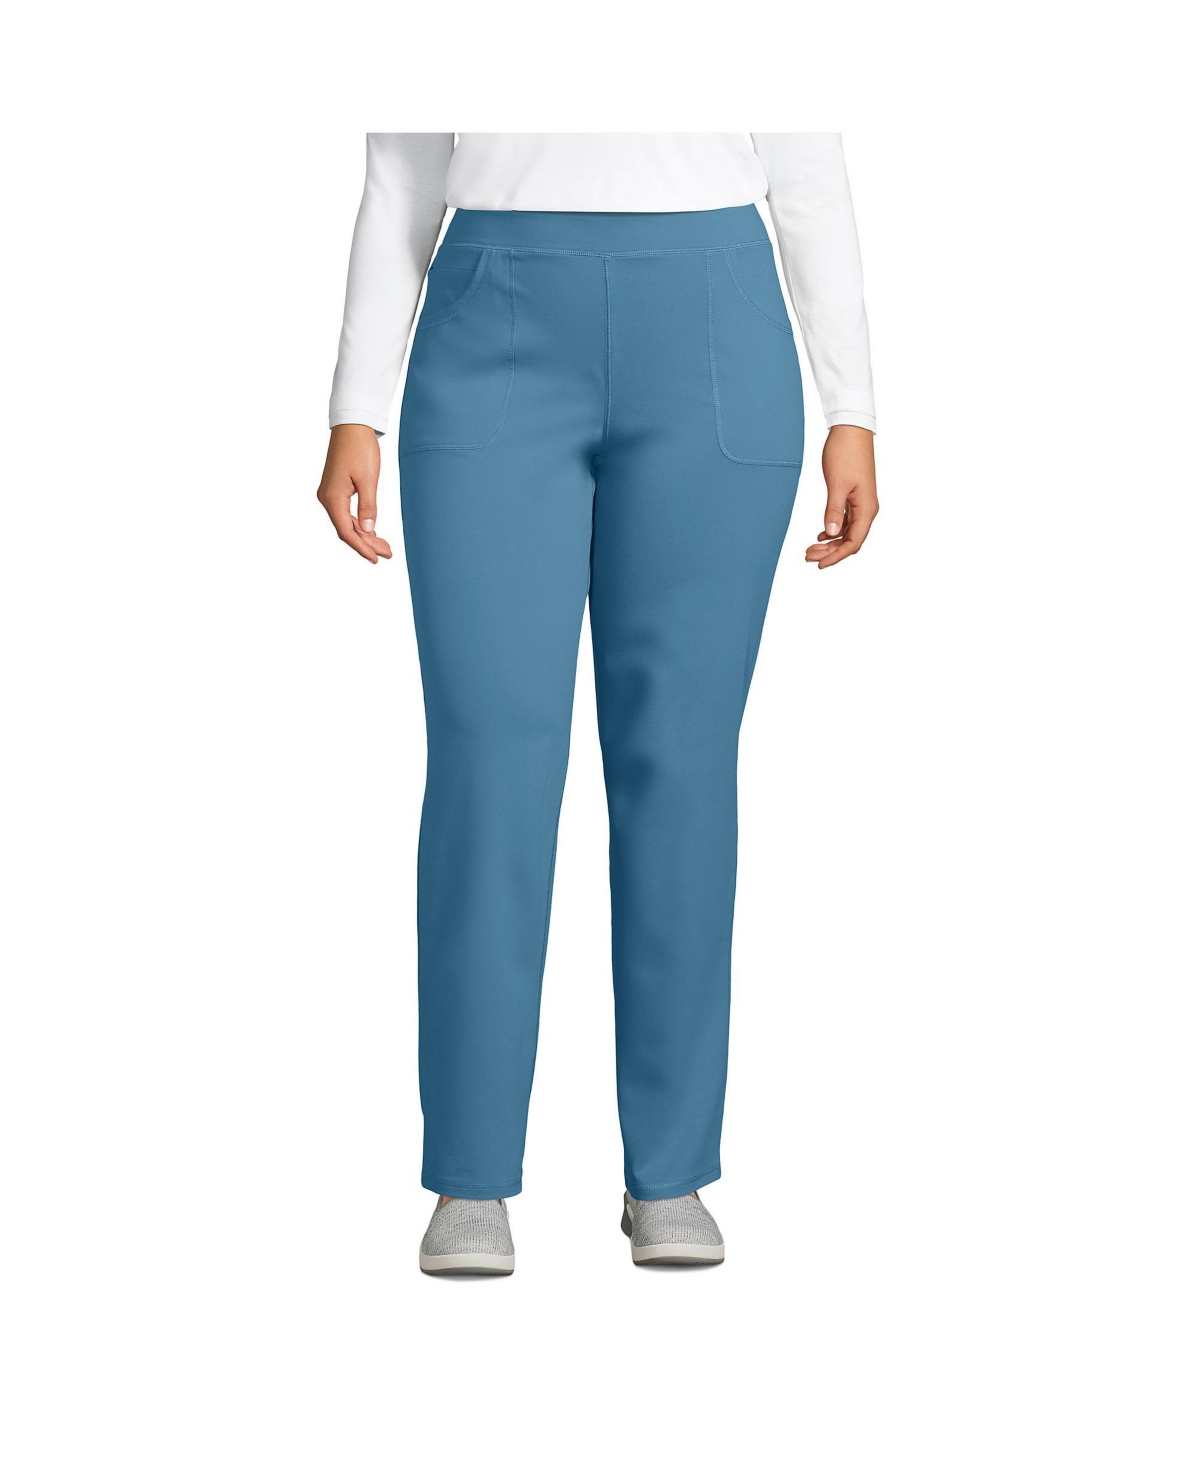 Lands' End Women's Plus Size Active 5 Pocket Pants In Muted Blue